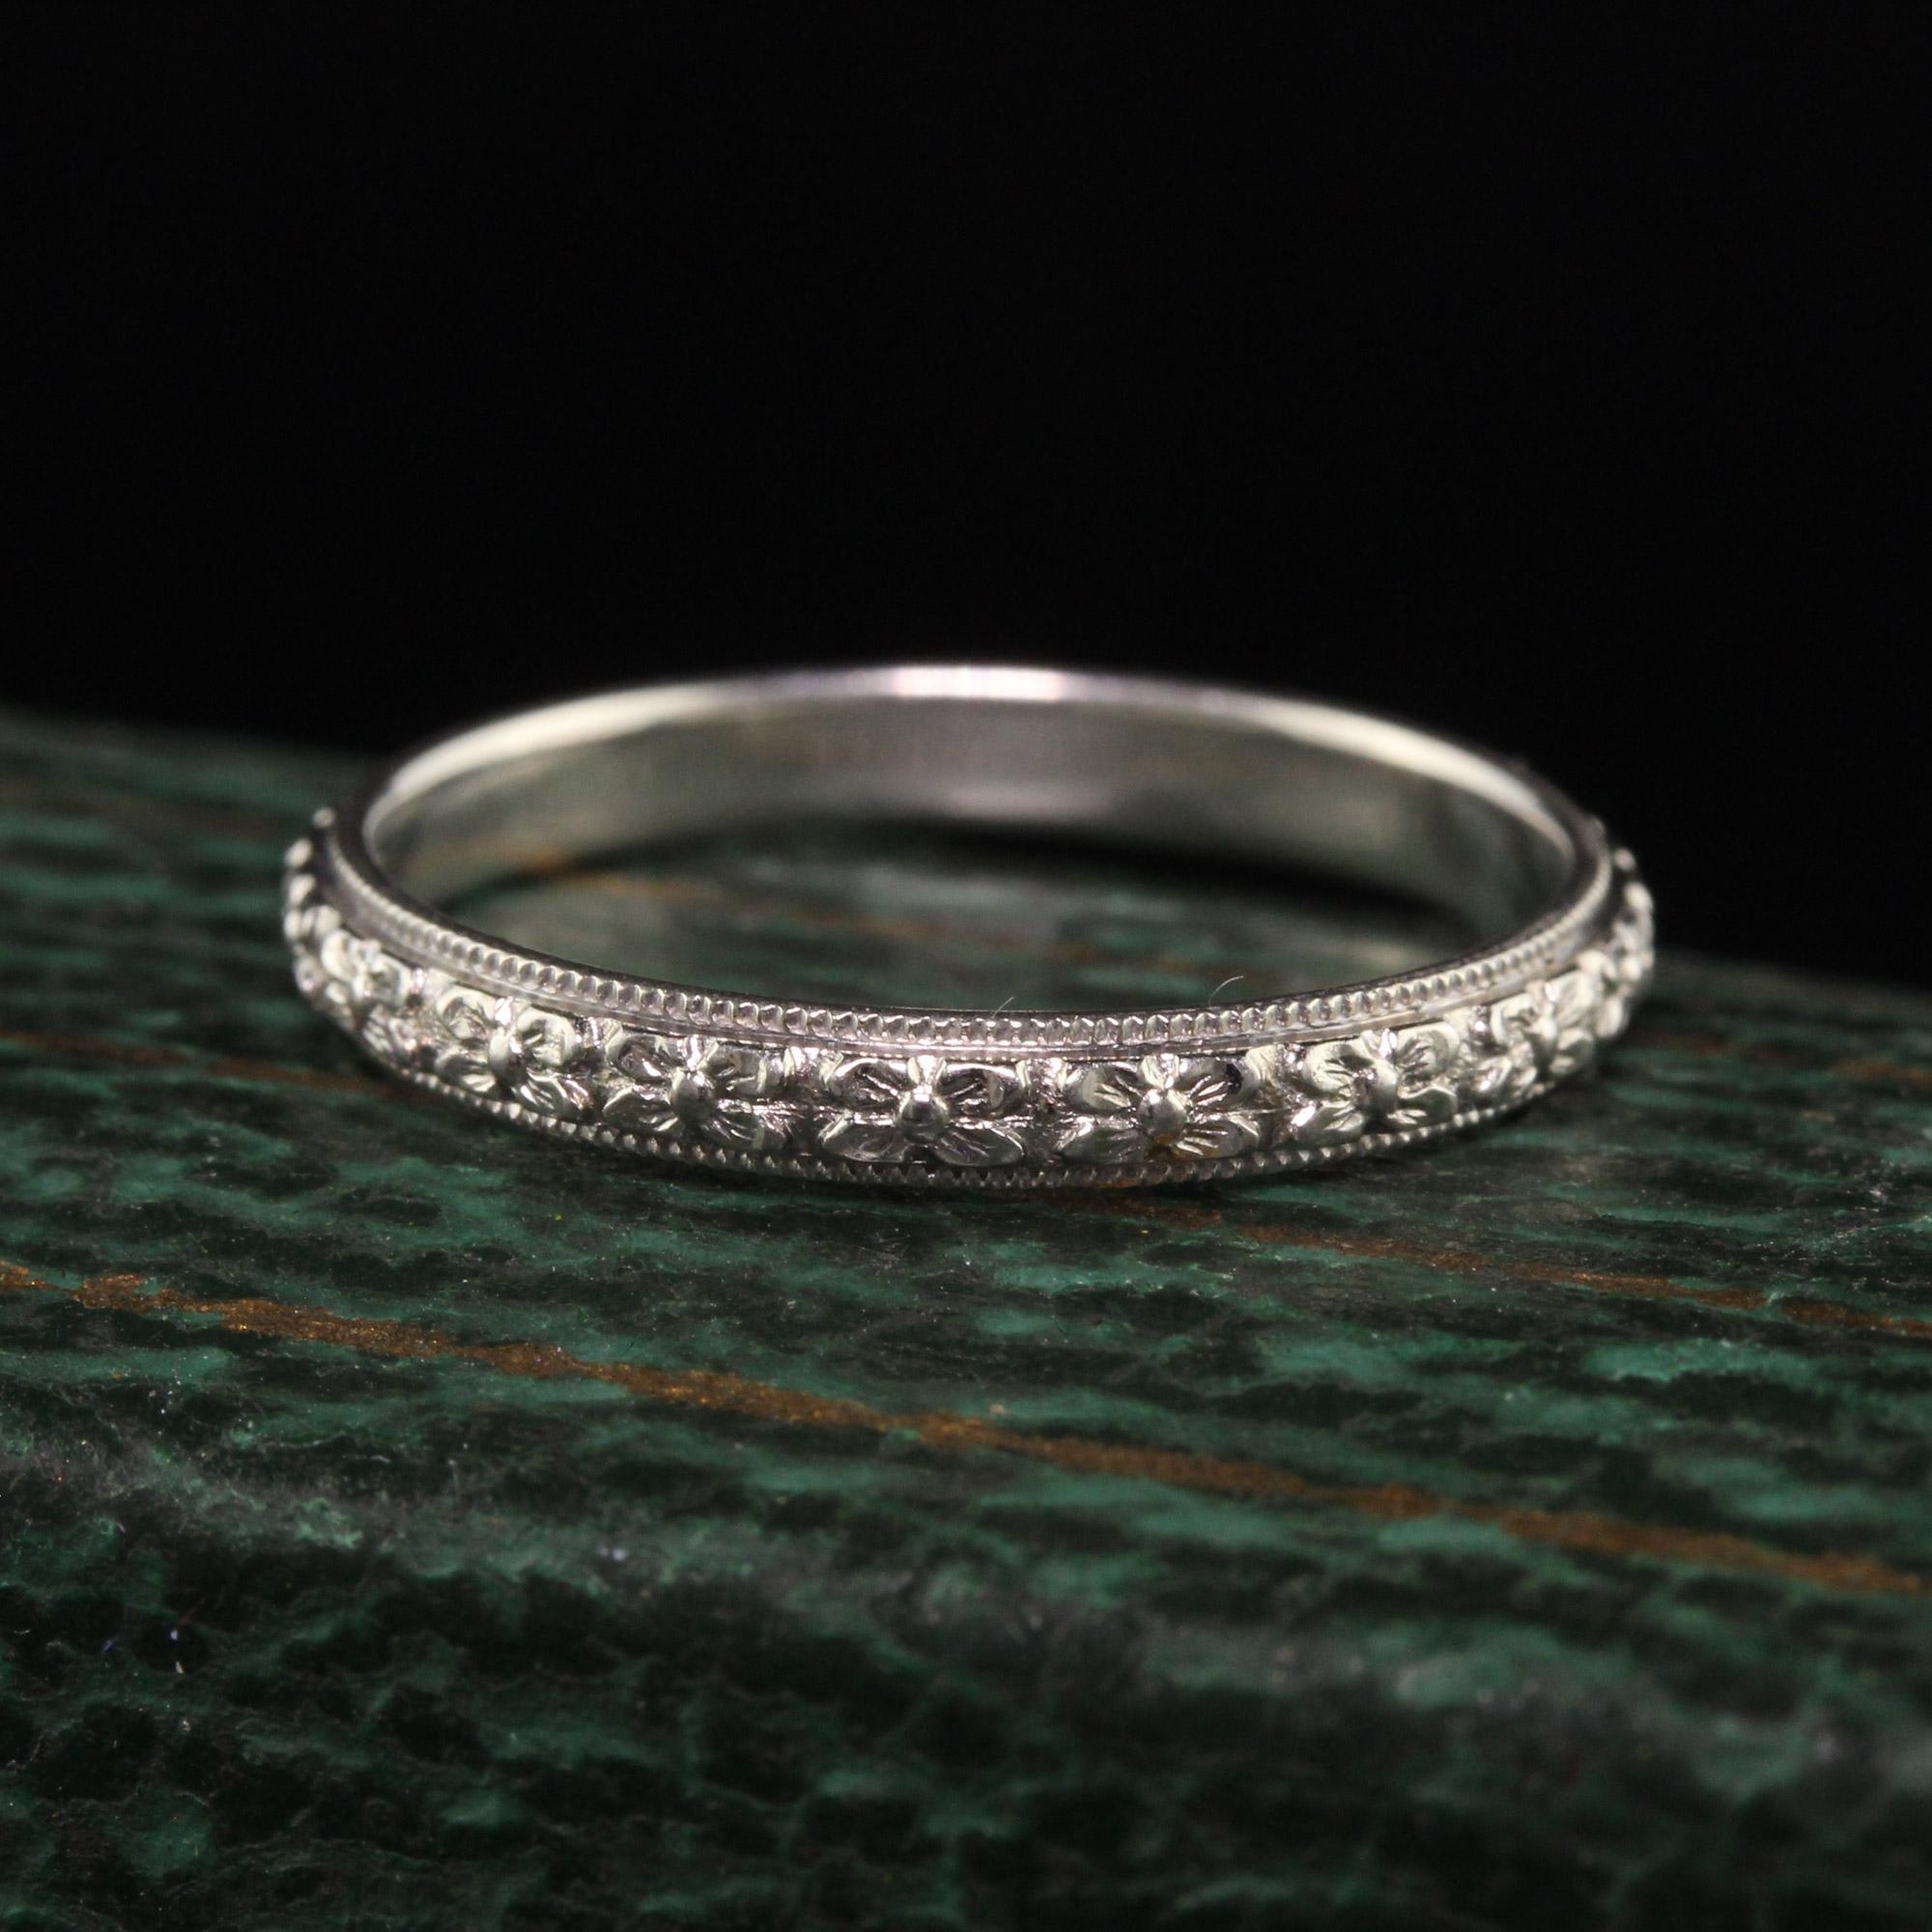 Beautiful Antique Art Deco 18K White Gold Floral Engraved Wedding Band. This gorgeous wedding band is crafted in 18K white gold and is in incredible condition considering its age! It has floral engravings going around the entire band.

Item